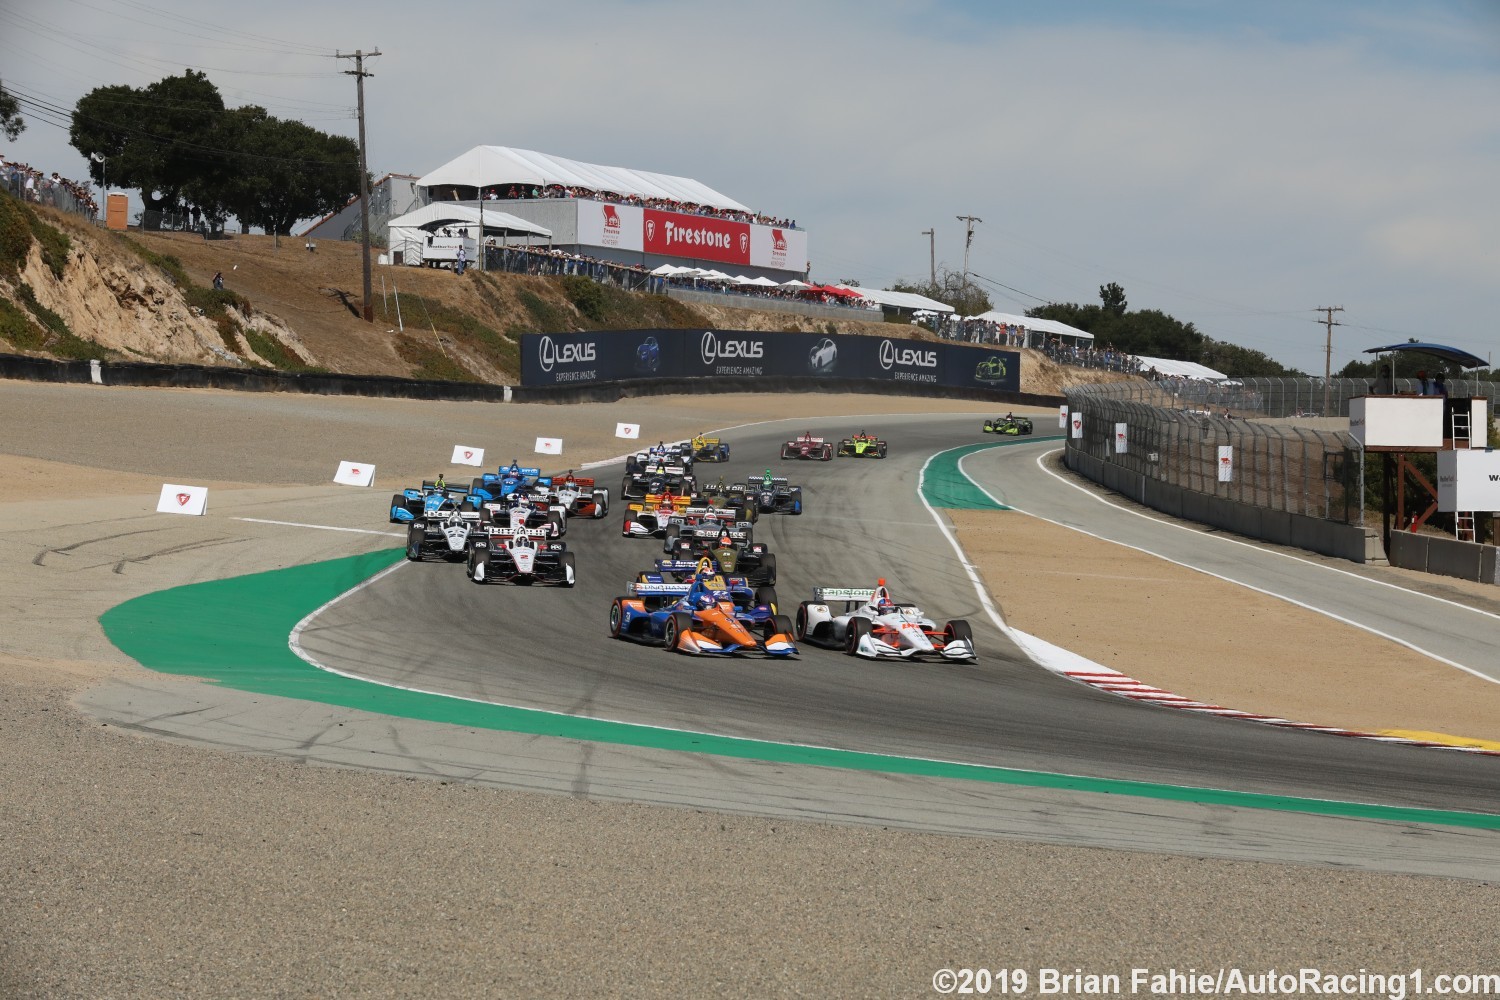 Herta grabs lead at the start